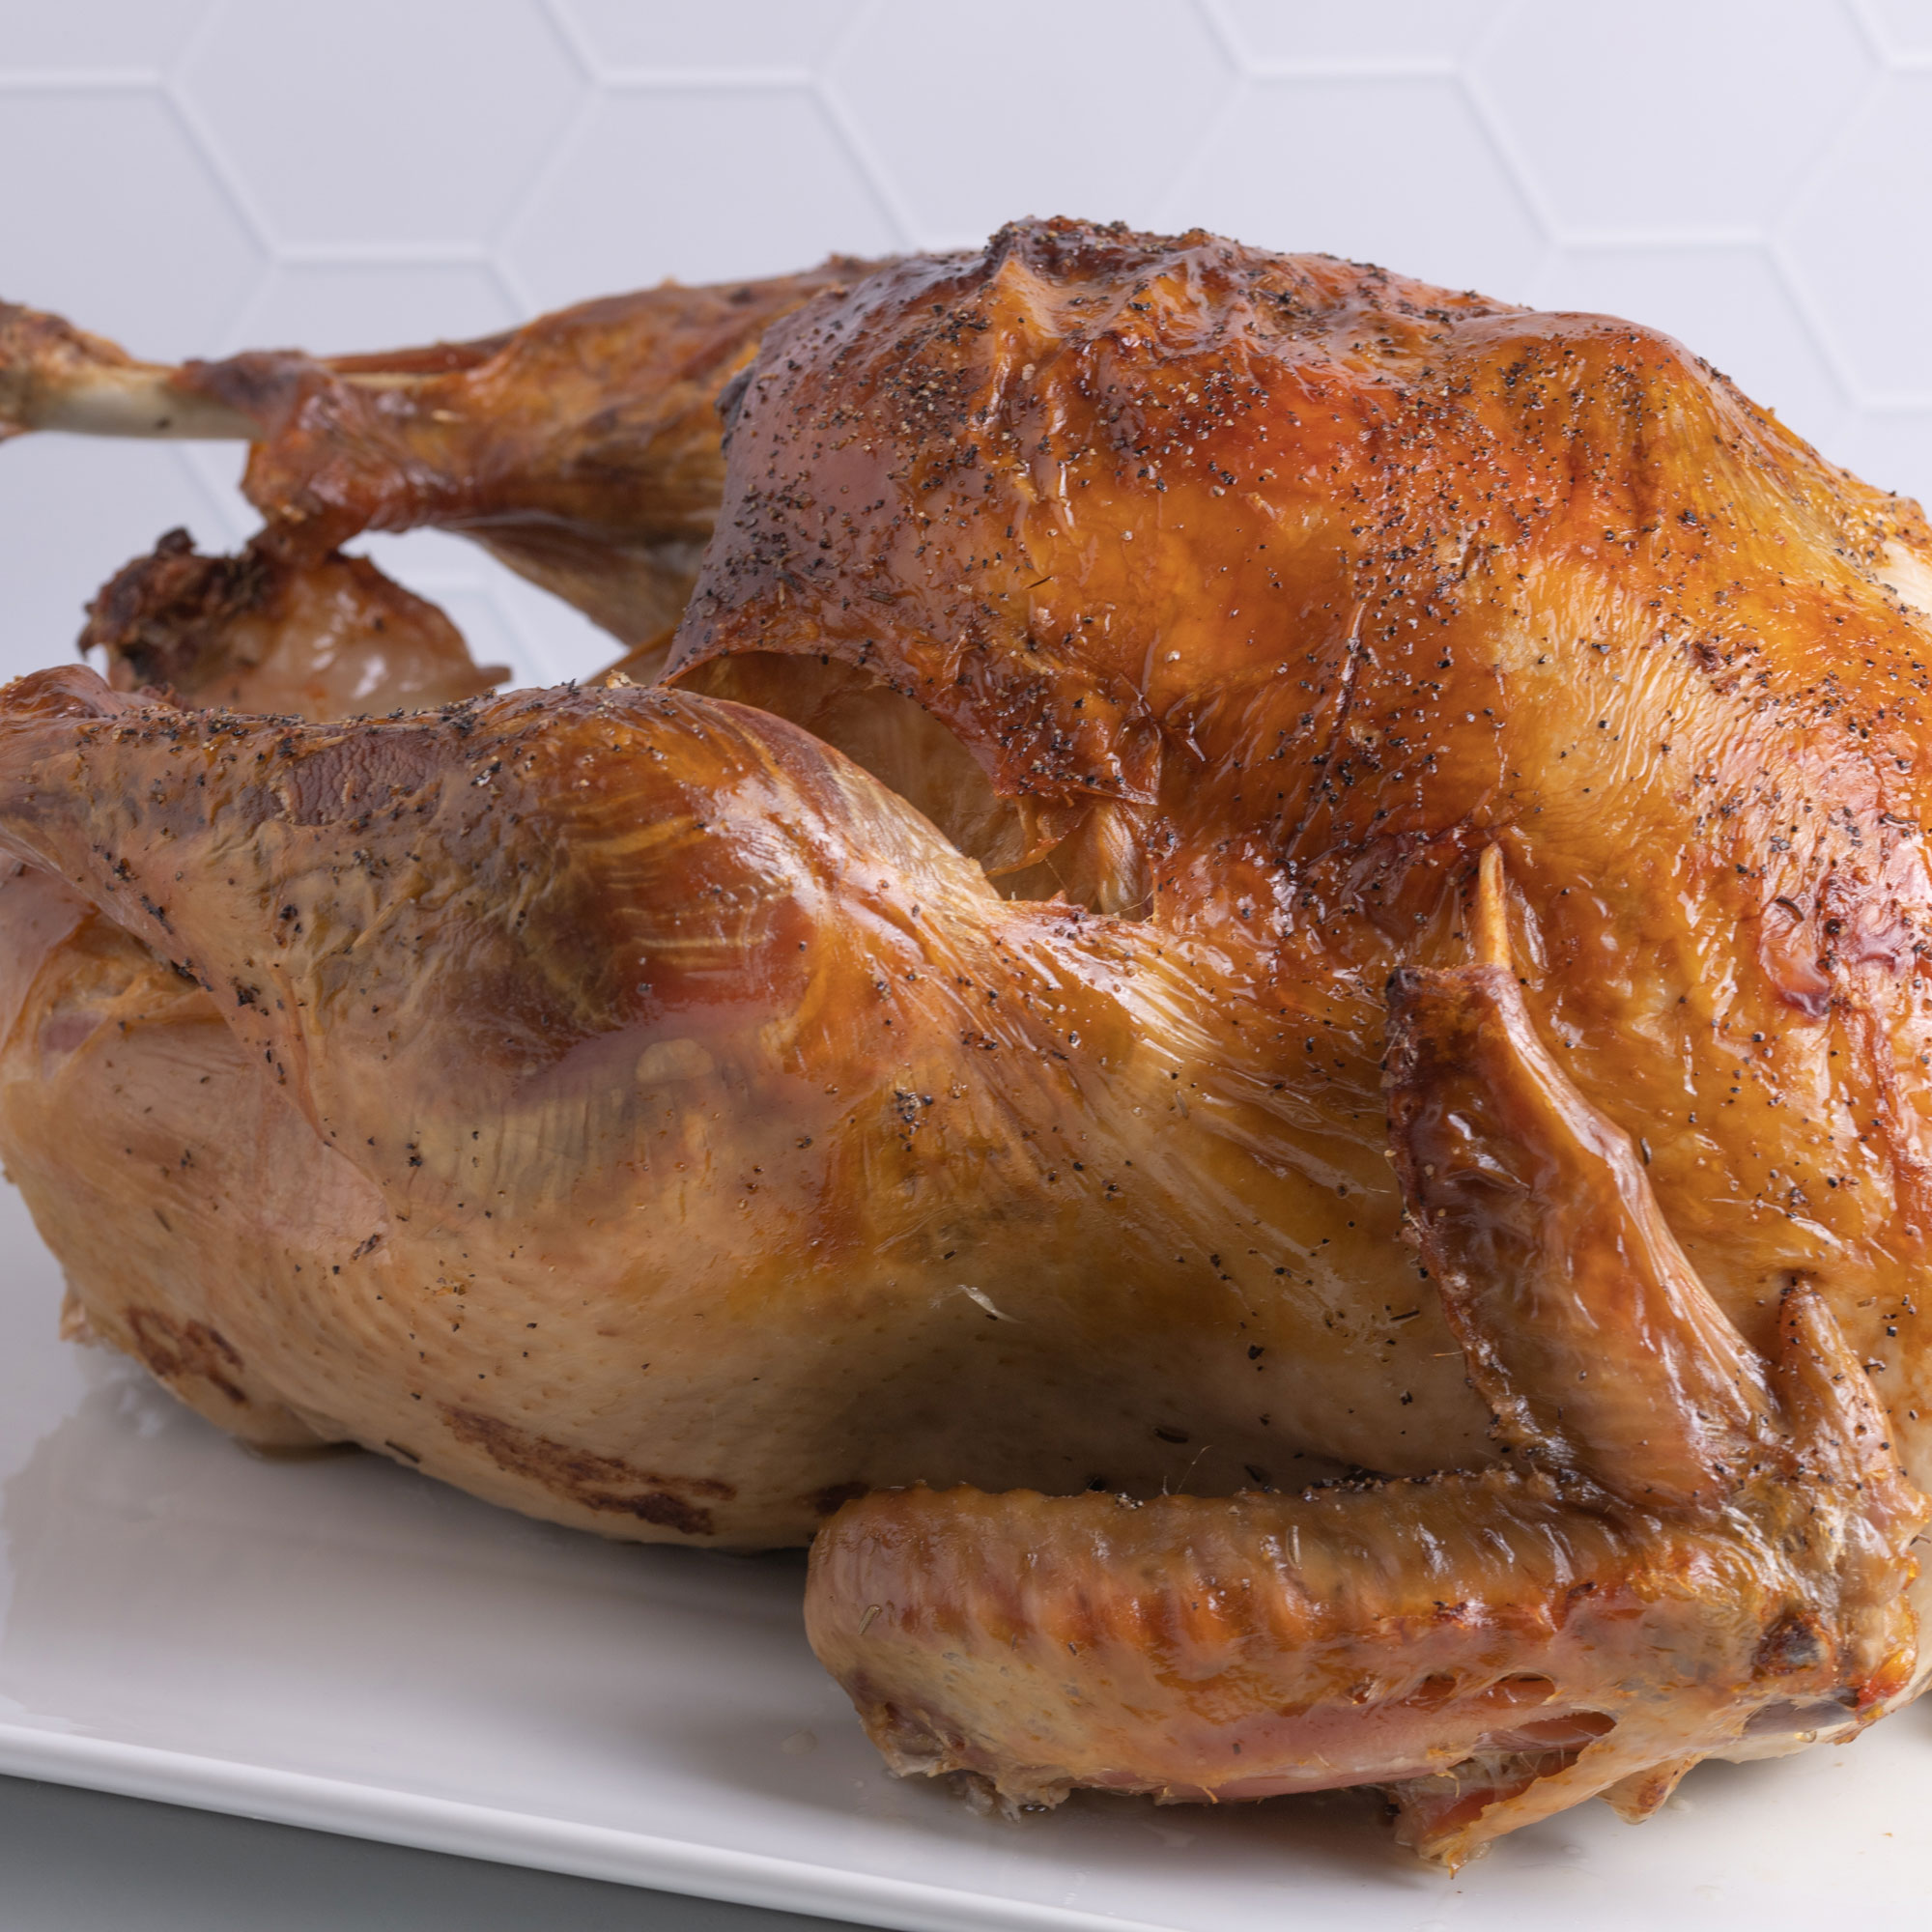 a close up view of a perfectly golden-brown whole turkey